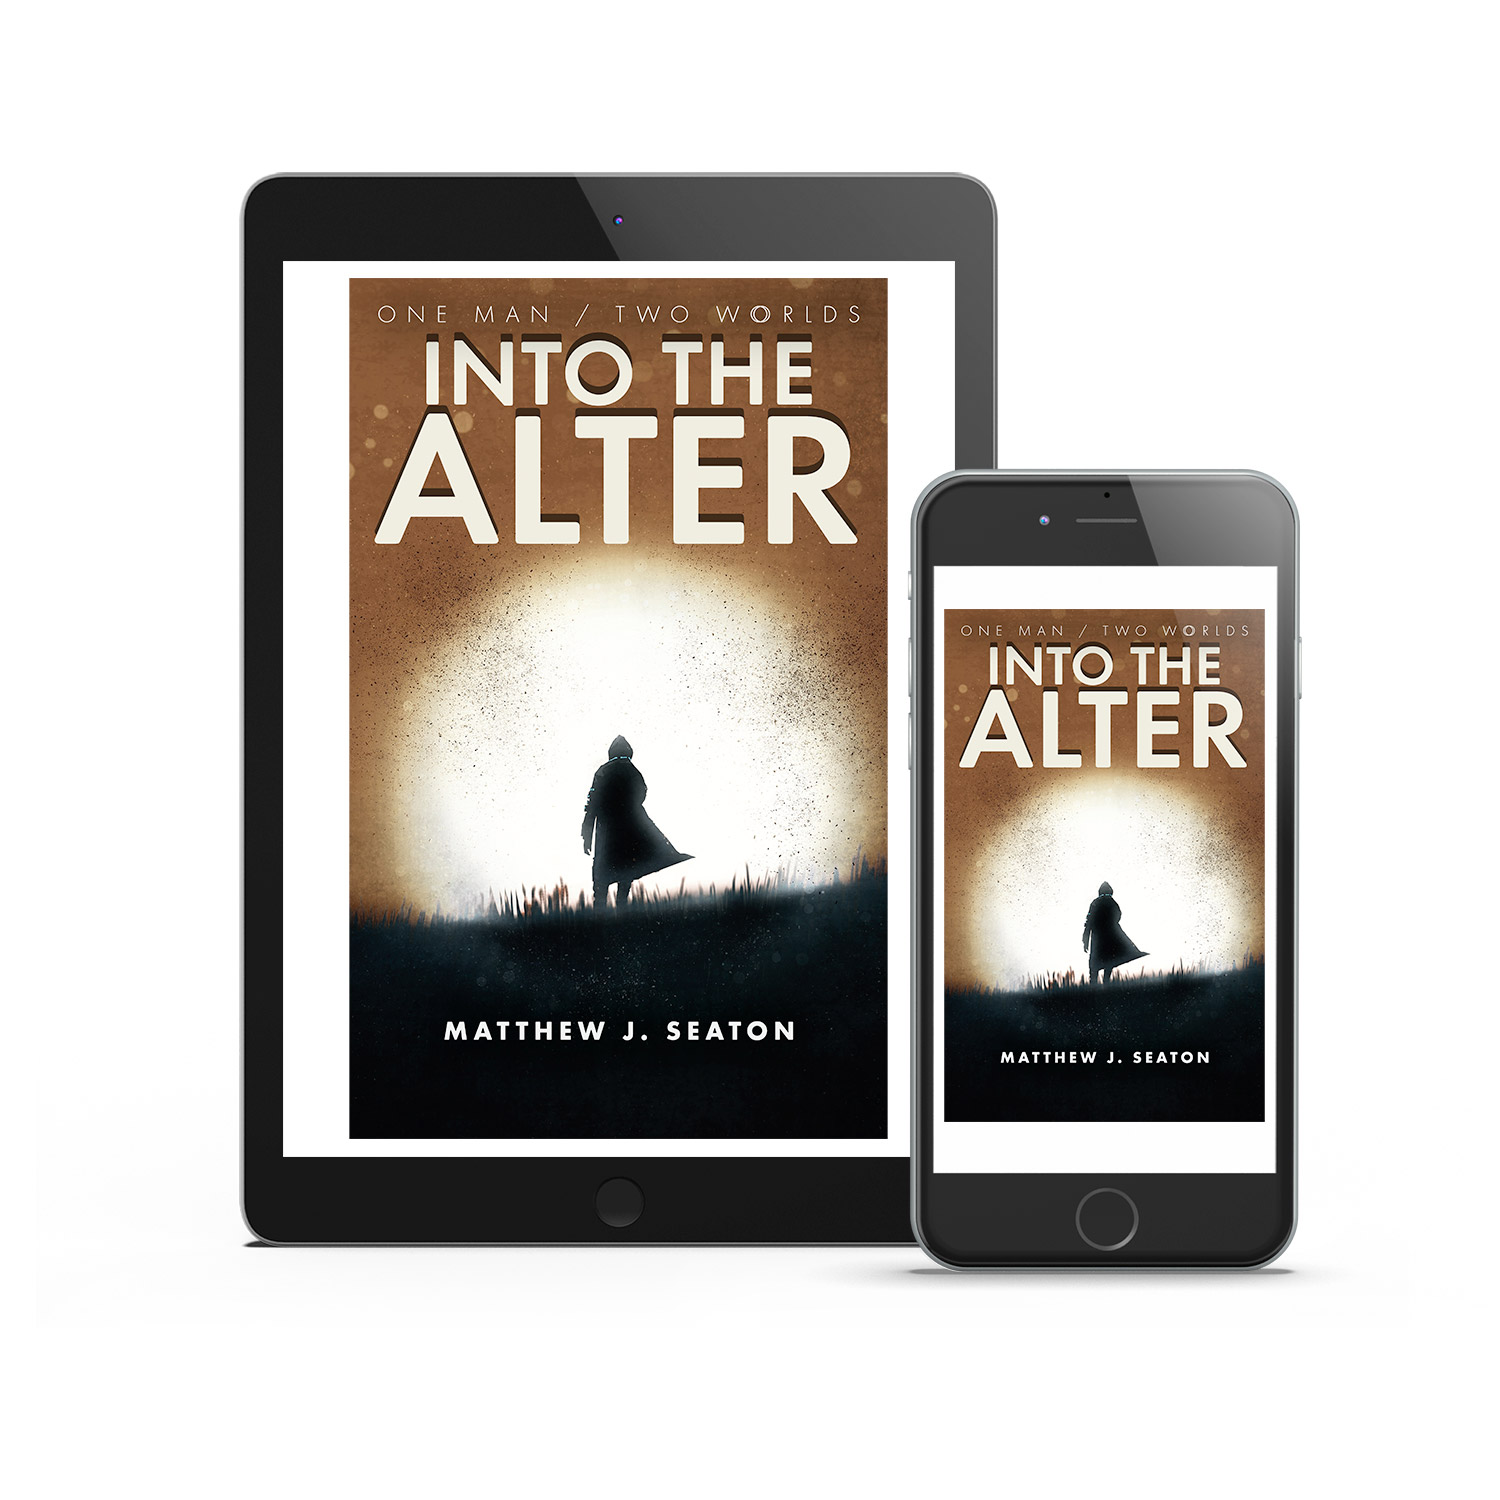 'Into The Alter' is a swarming, apocalyse scifi novel. The author is Matthew Seaton. The book cover design and interior formatting are by Mark Thomas. To learn more about what Mark could do for your book, please visit coverness.com.